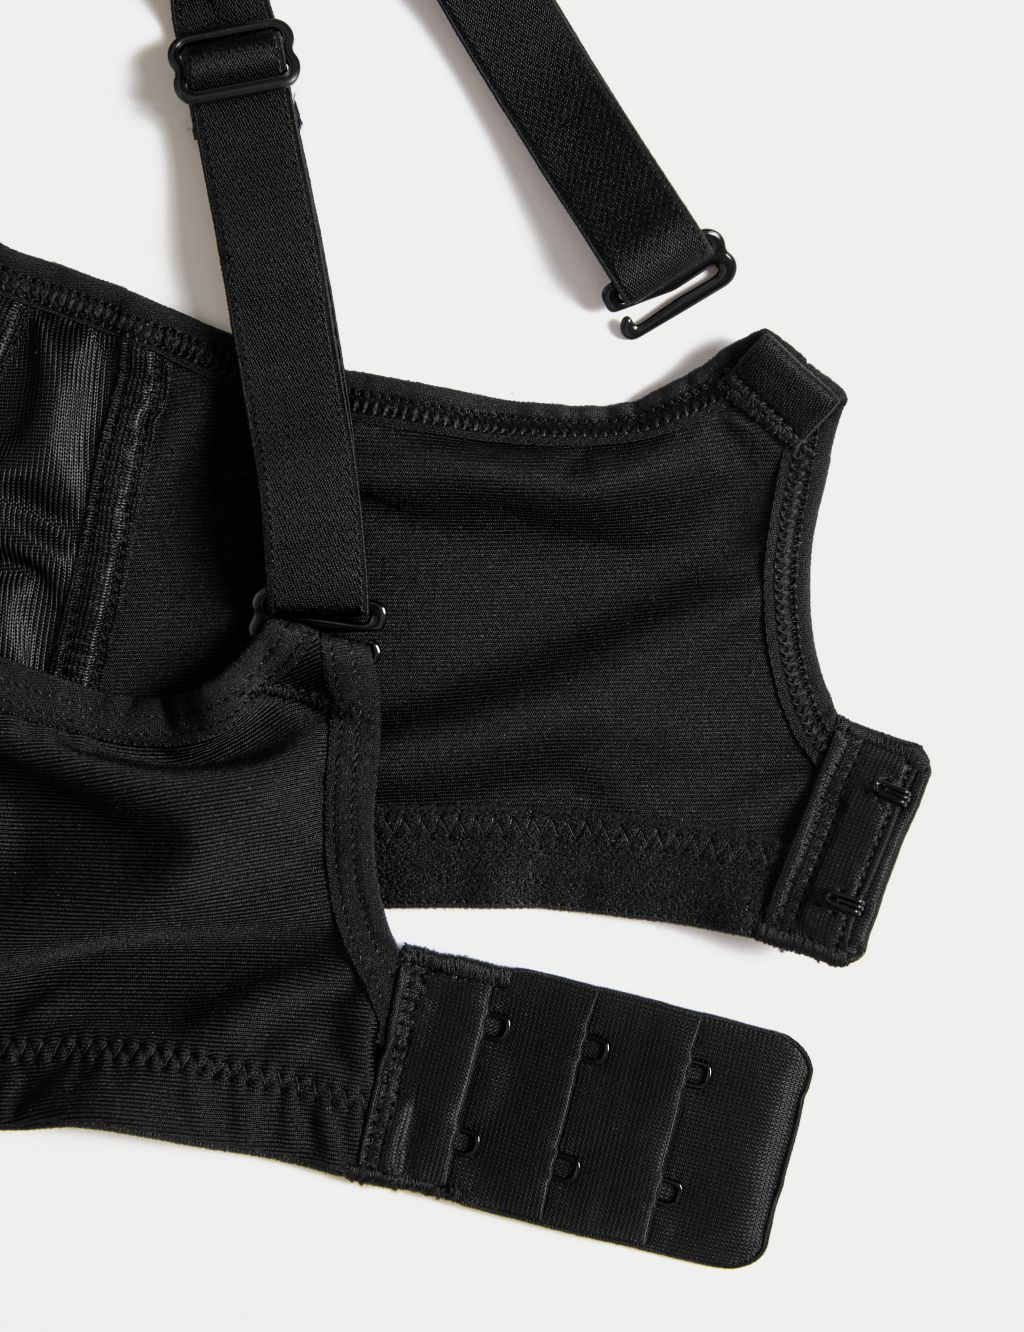 3 sports bras from M&S for us fuller busted ladies! #fullerbust #bigge